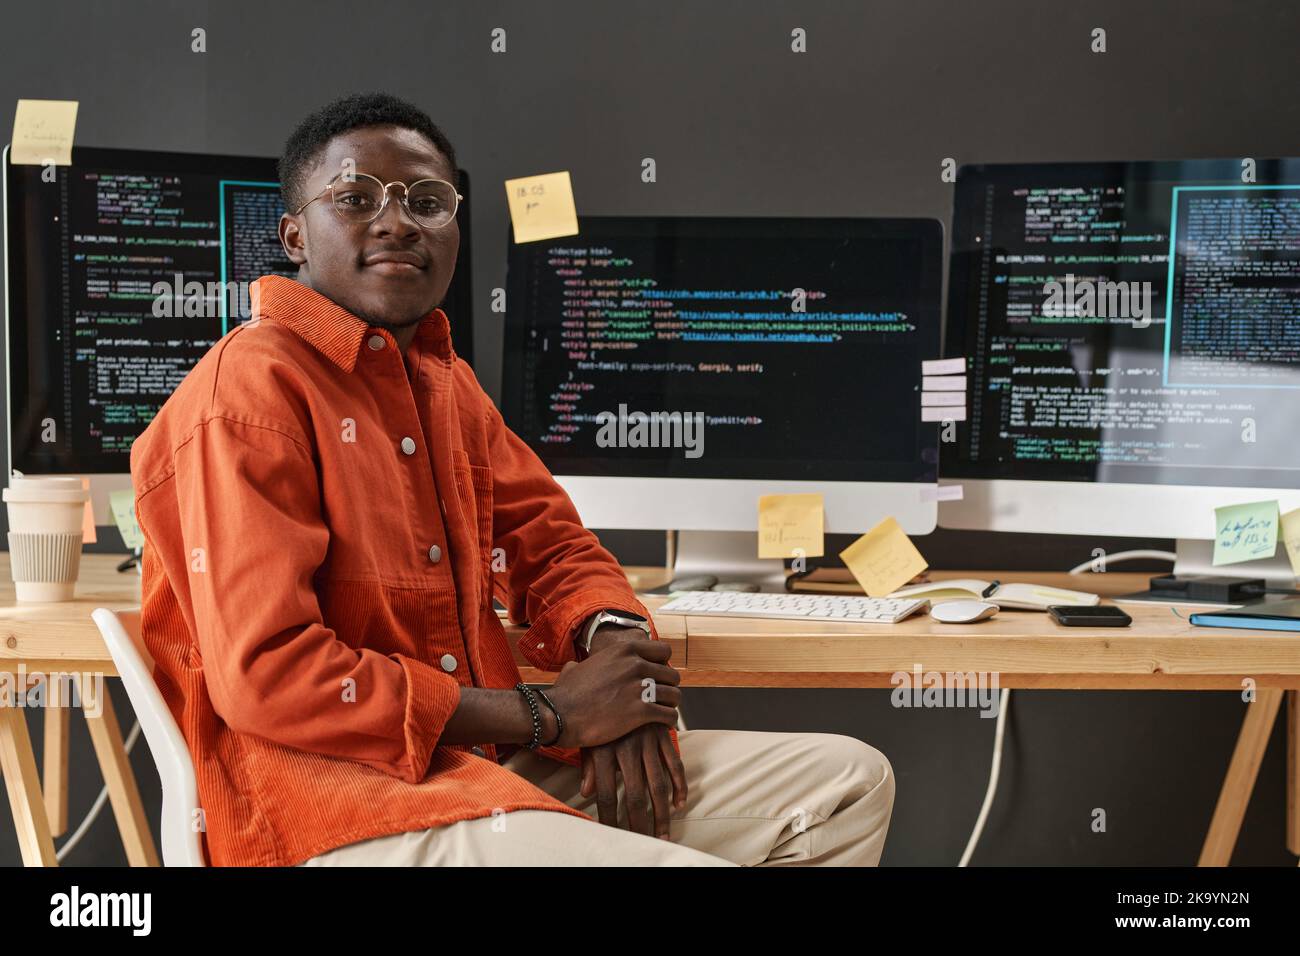 Young IT support manager looking at camera while sitting by workplace in front of computer monitors with decoded data on screens Stock Photo